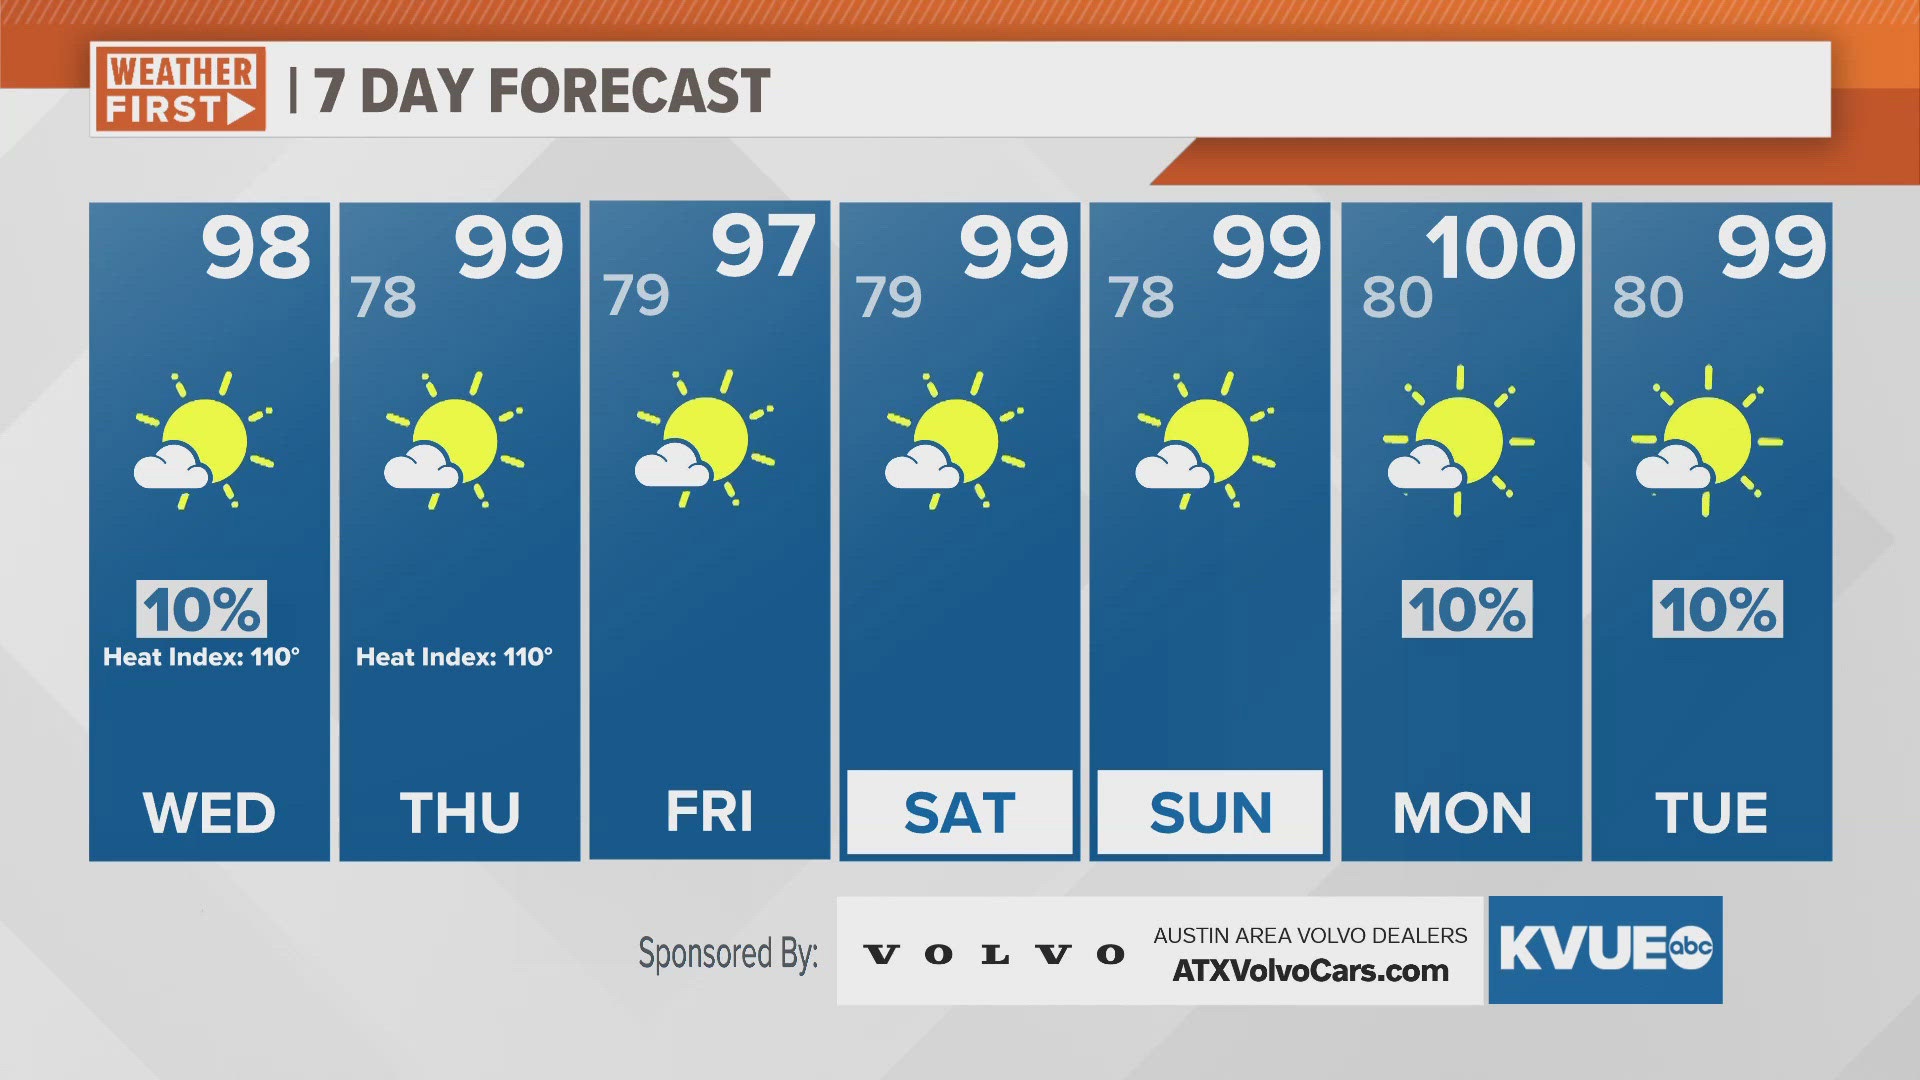 High heat and humidity throughout the week. Weak tropical activity.